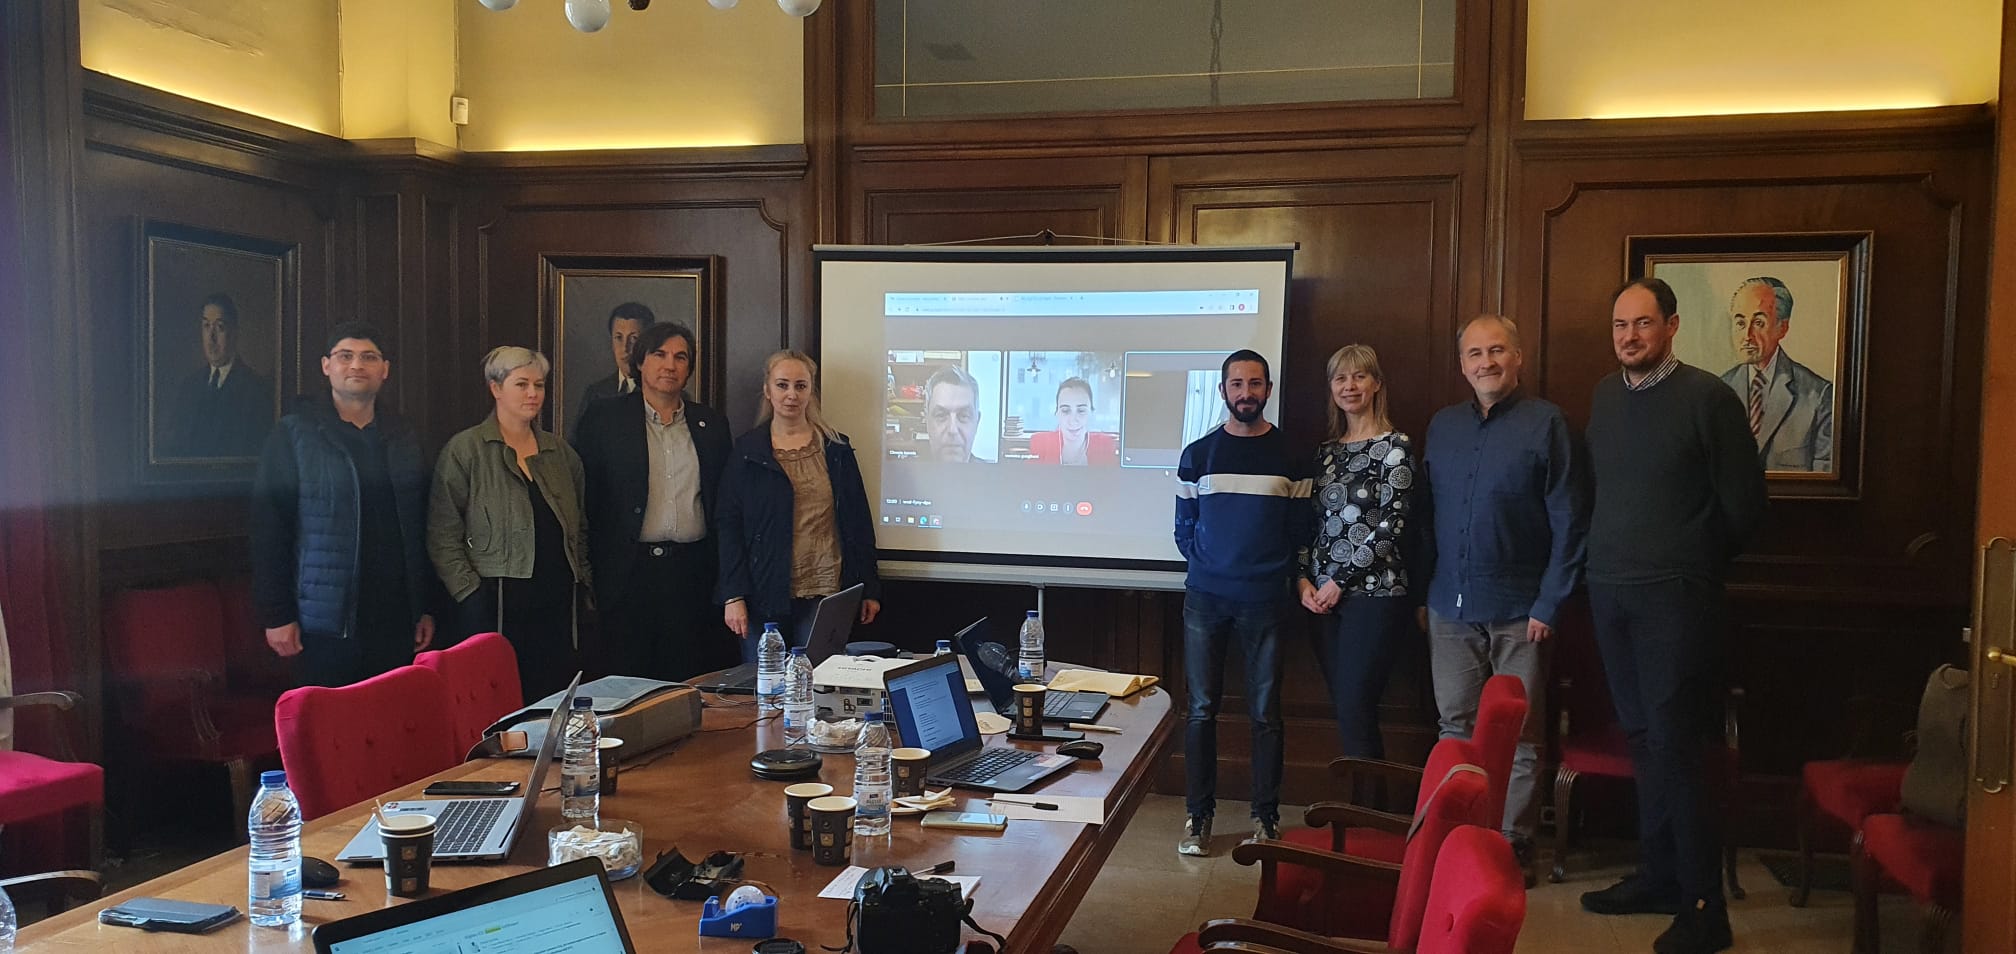 DigiTEX consortium meets, physically, for first time in its 3rd Transnational Project Meeting